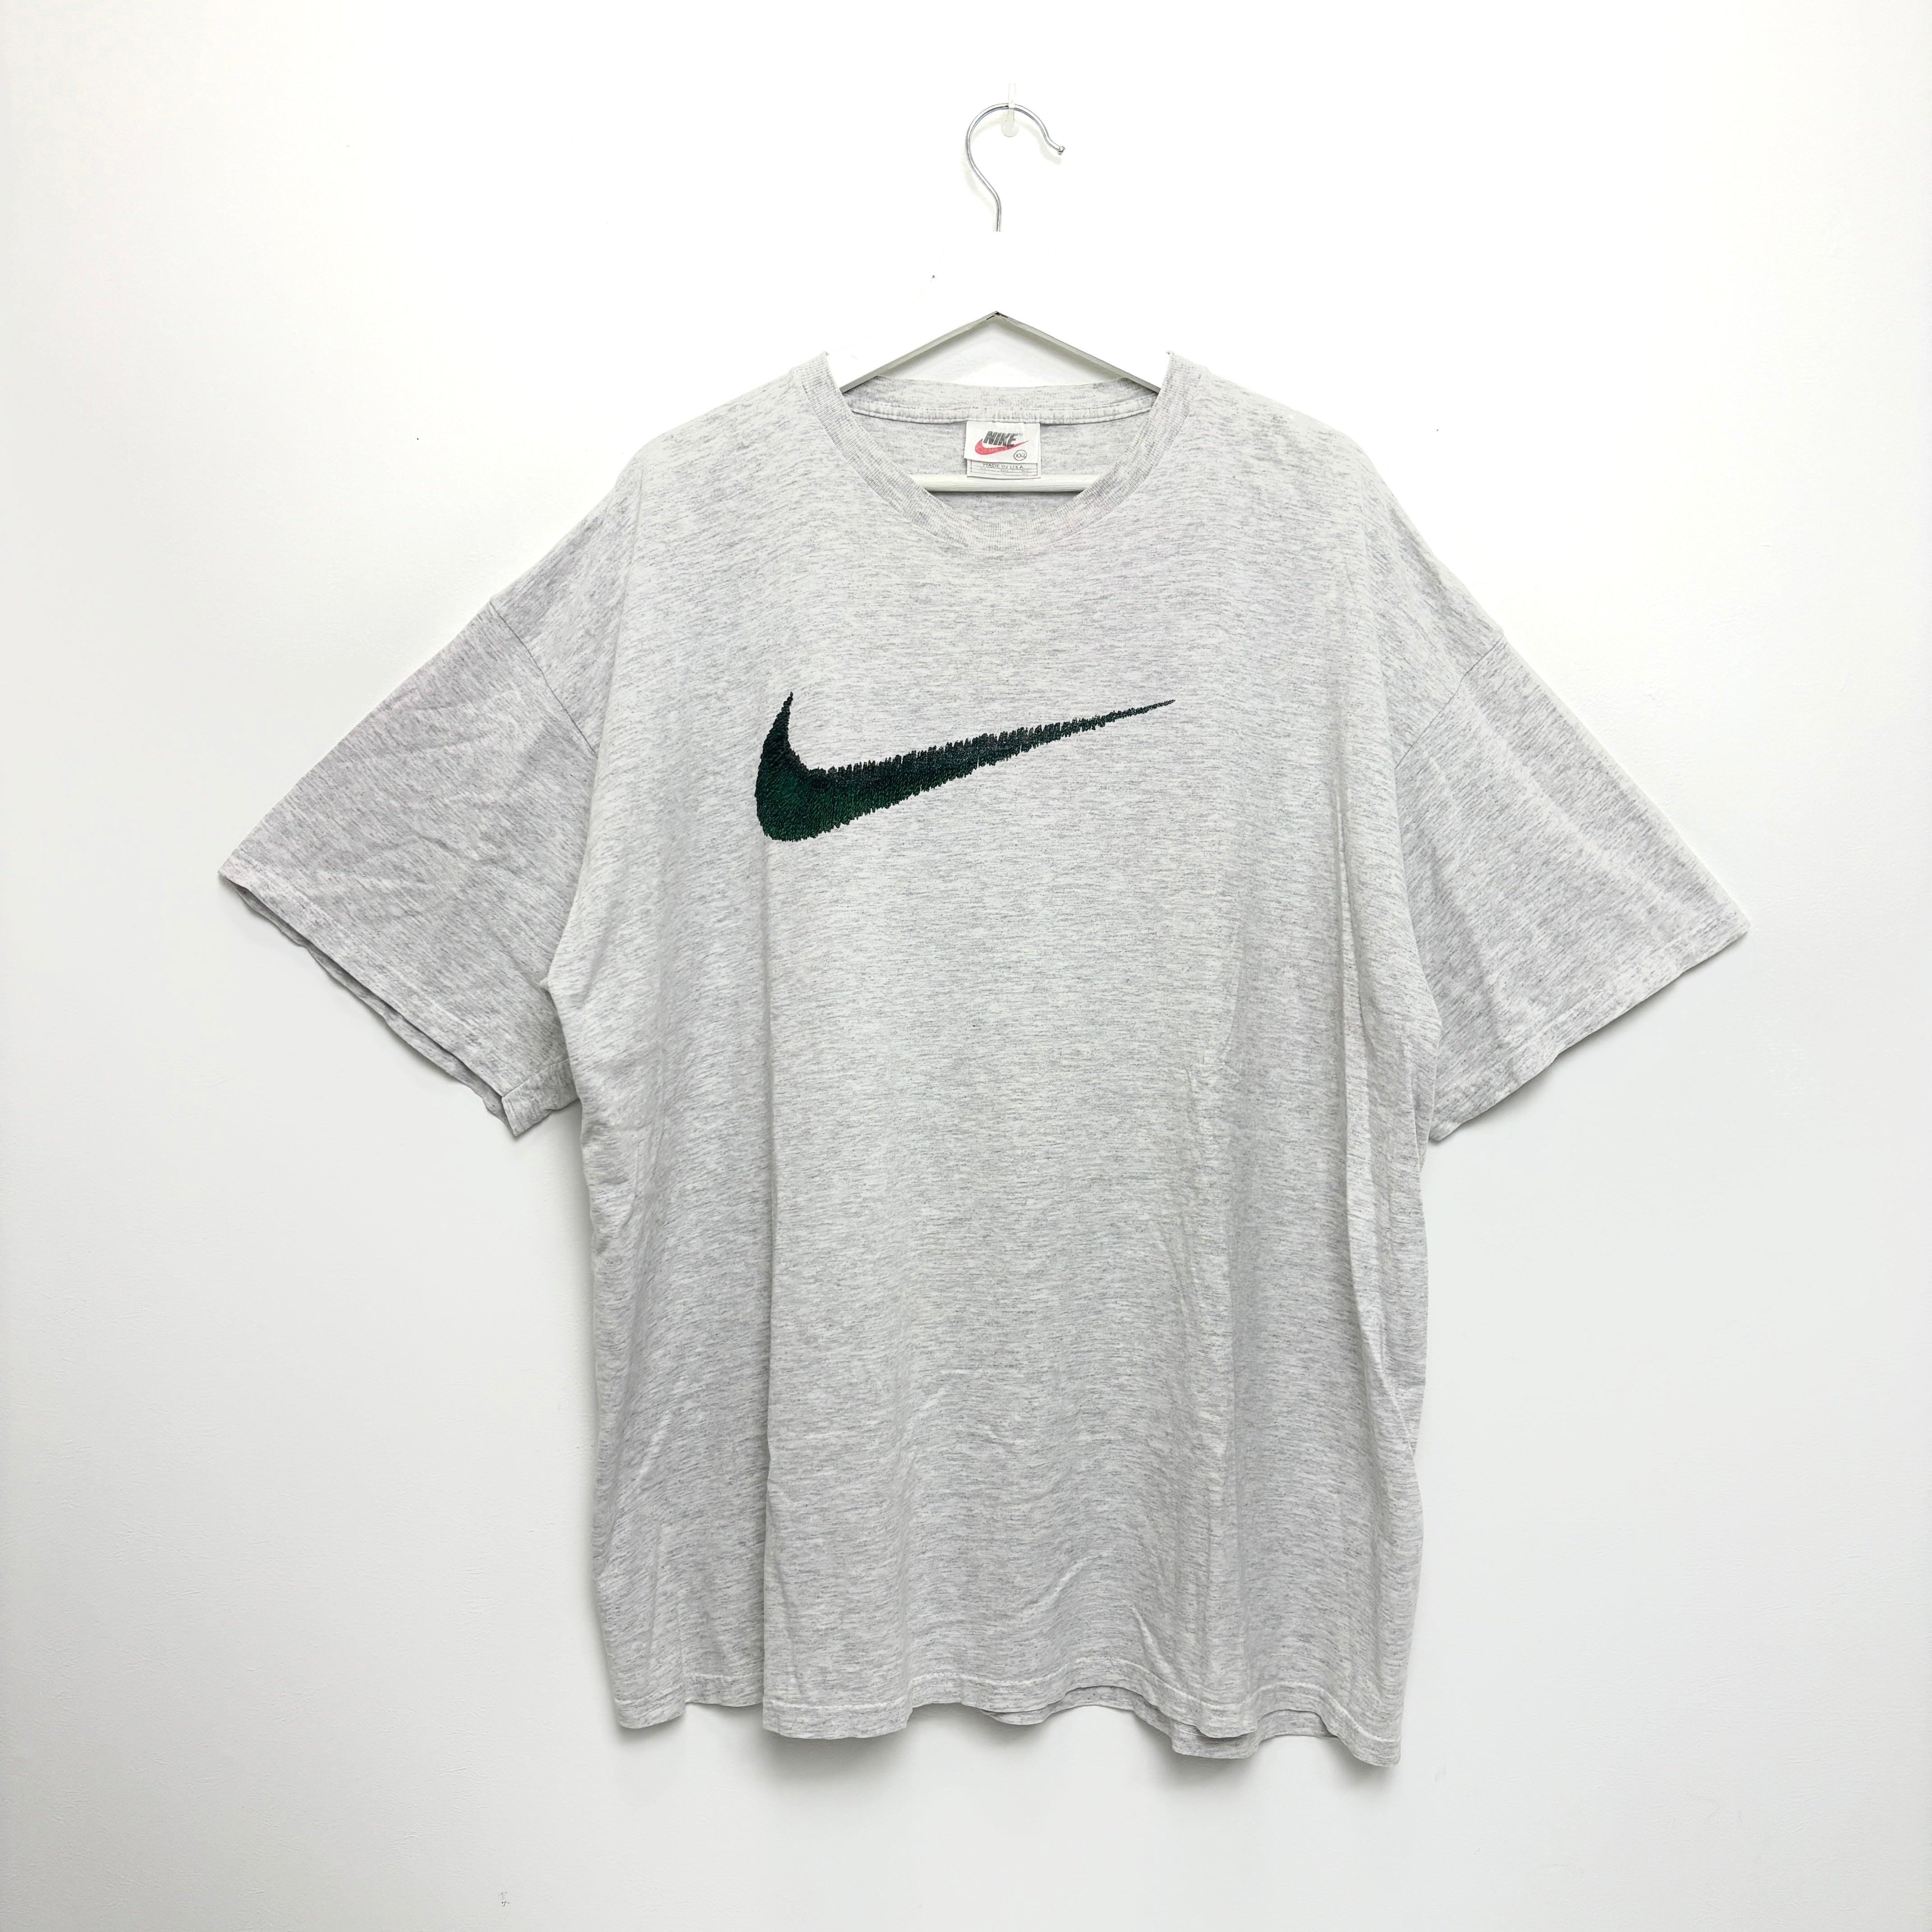 90s NIKE Embroidery Swoosh Logo T-Shirt Gray Tee Made in USA